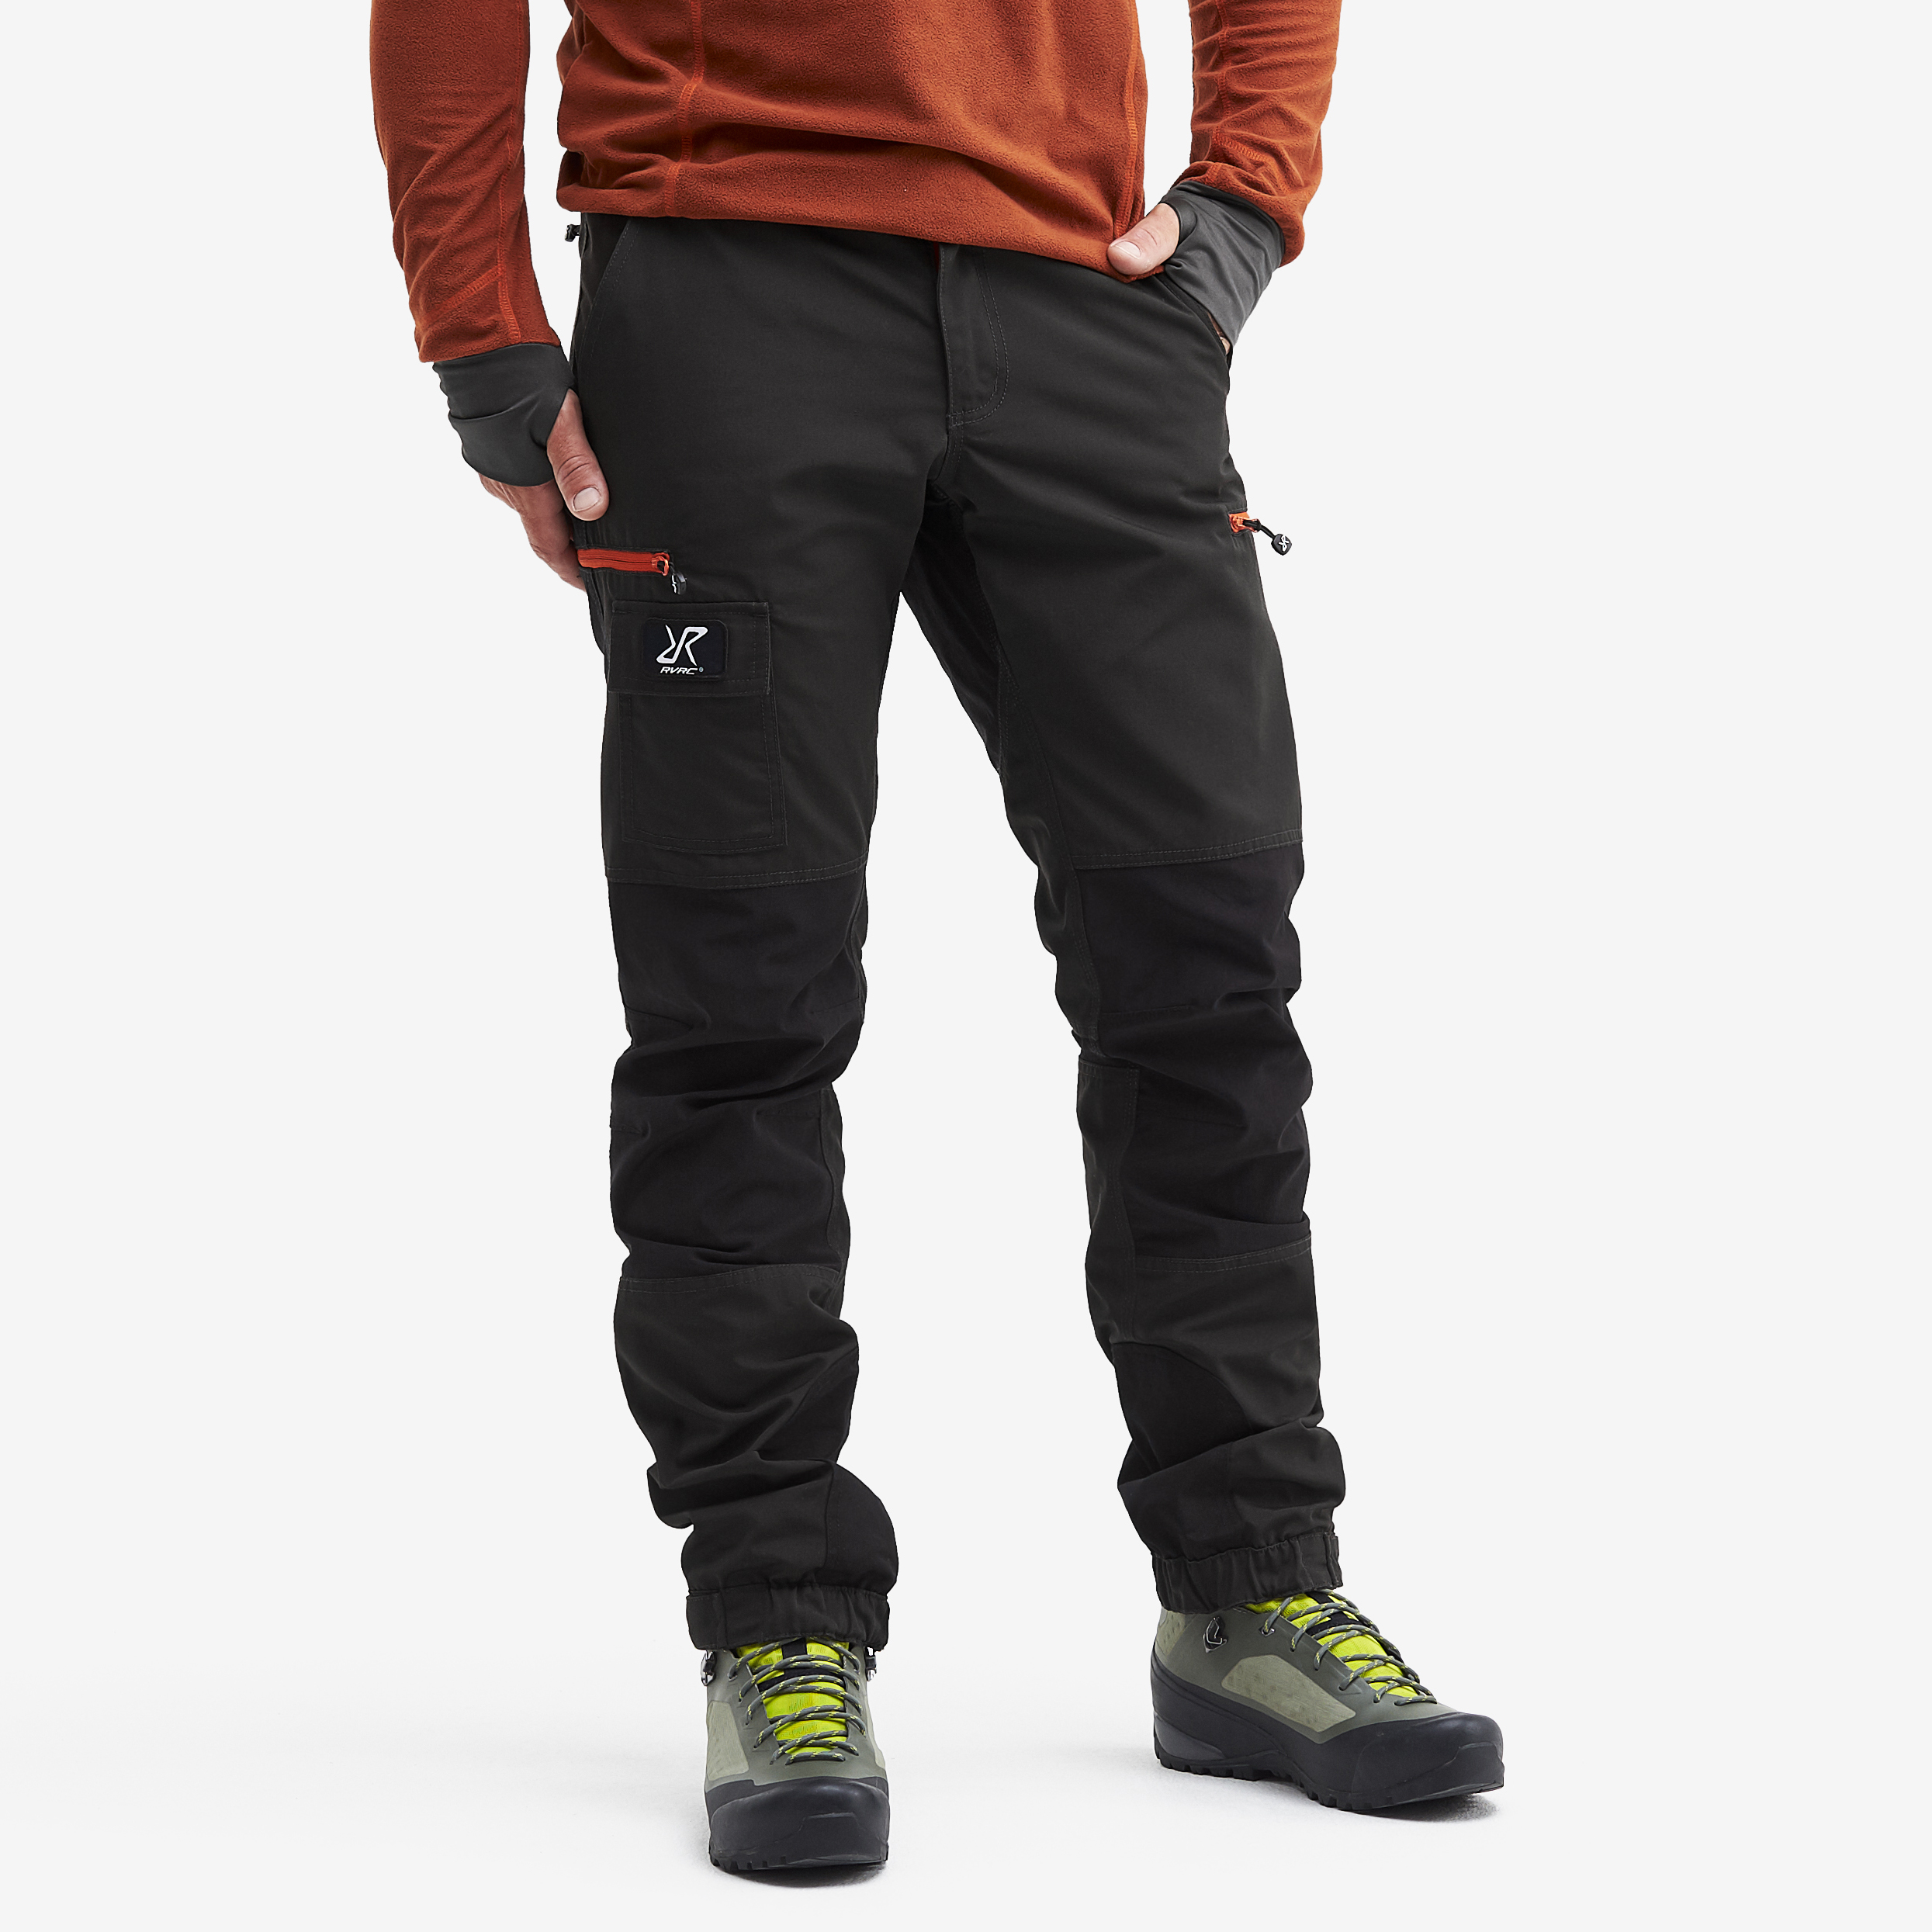 Nordwand Pants Anthracite/Autumn Hombres